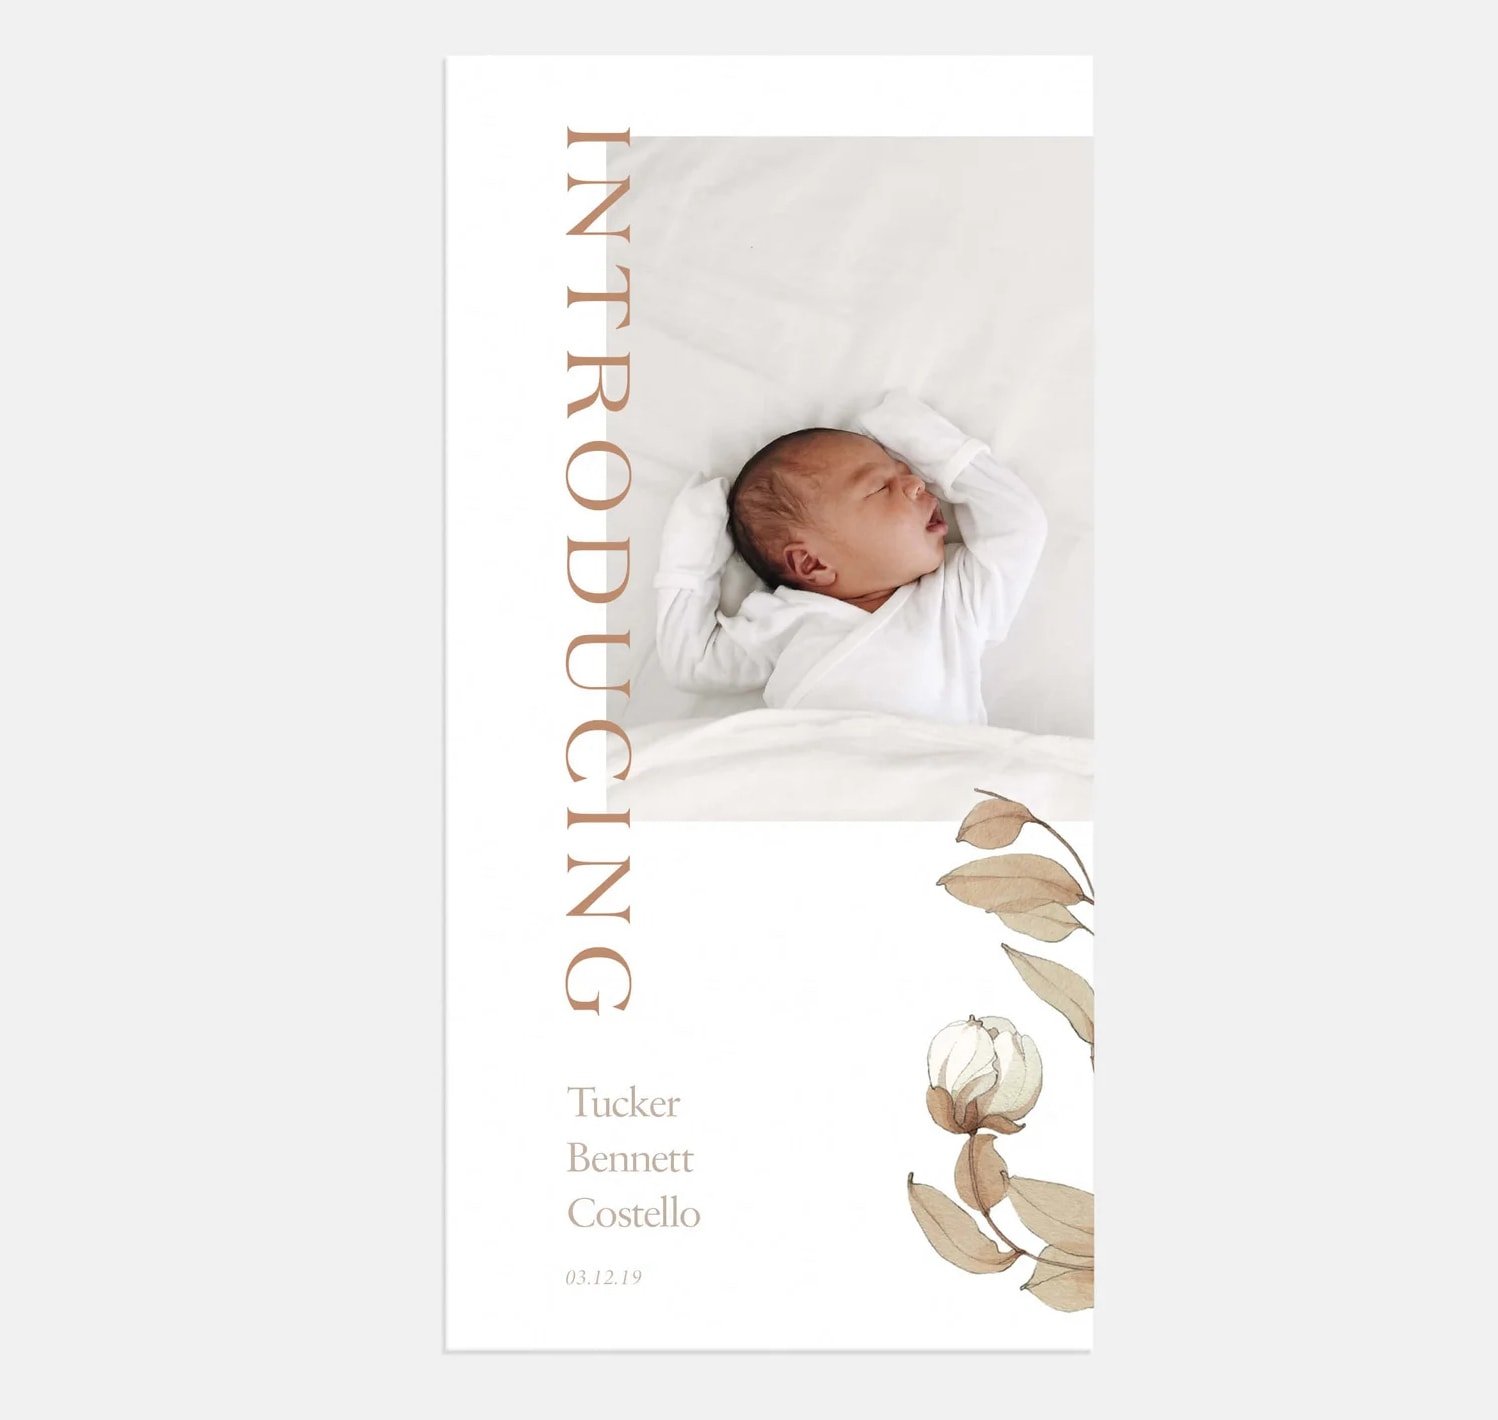 White card with image of a baby accented by a floral design. There is also text annoucing the birth of the baby. 